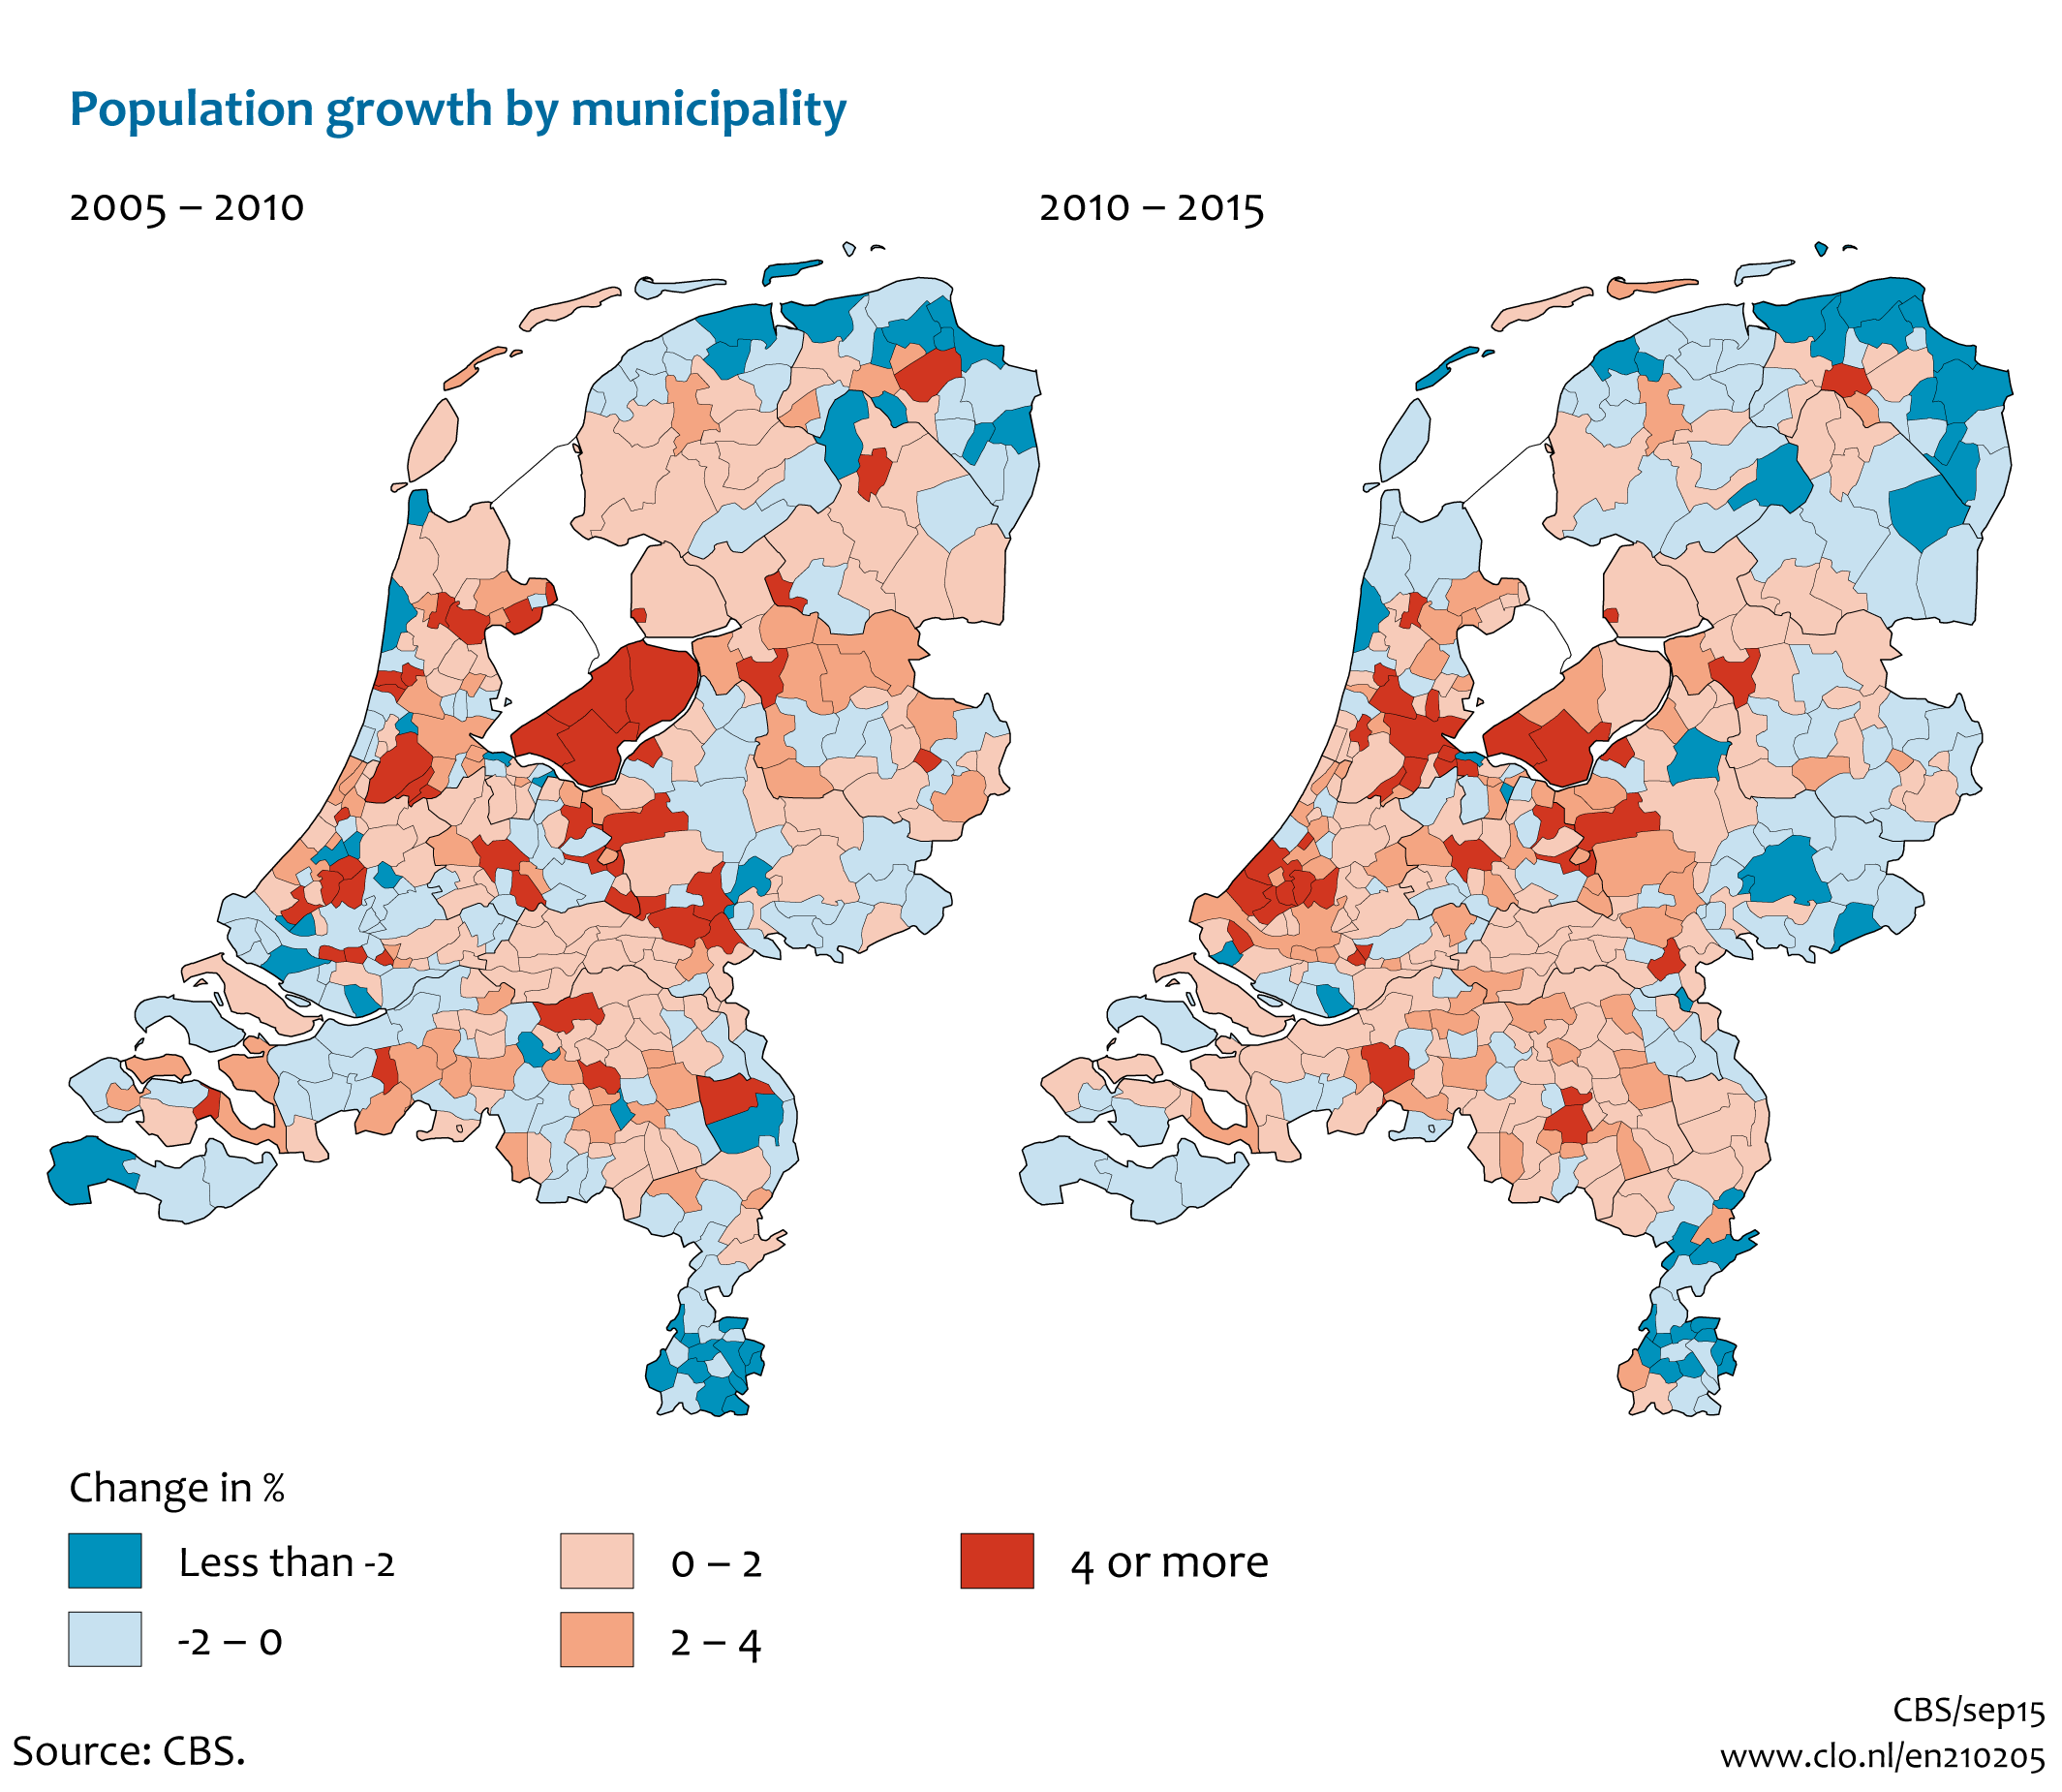 Image  Population growth by municipality. The image is further explained in the text.